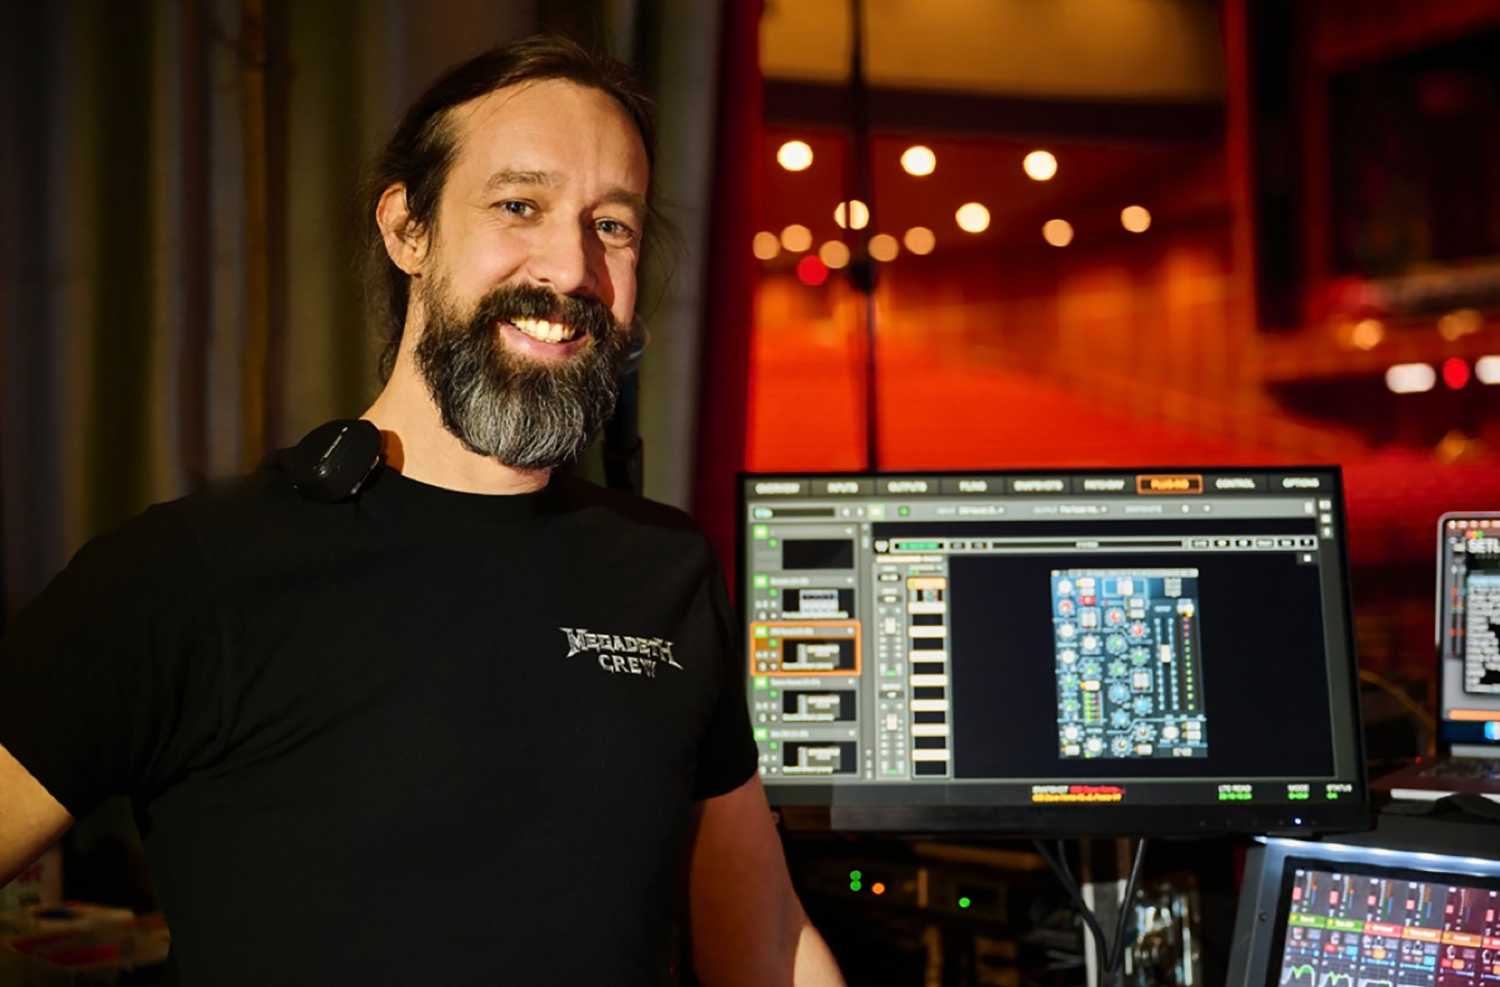 Megadeth’s producer Chris Rakestraw doubles as their touring monitor engineer